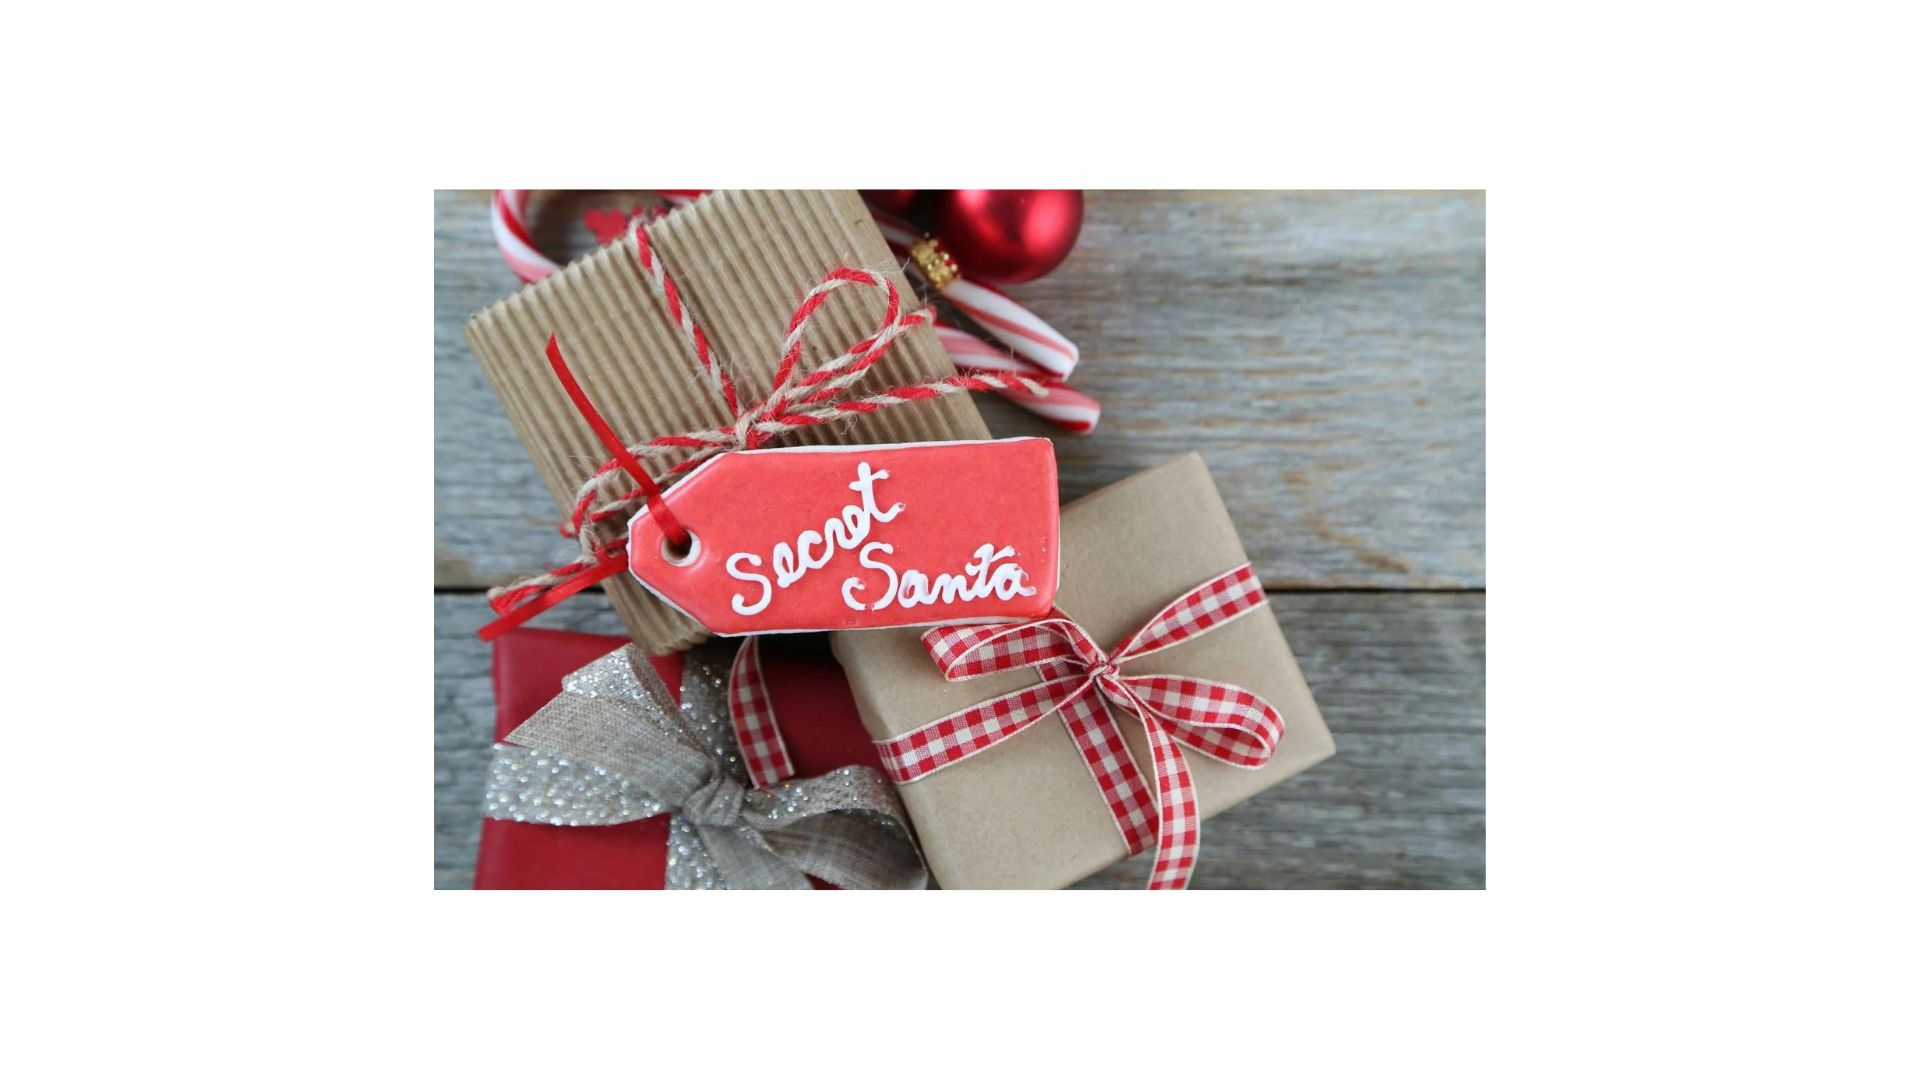 secret Santa gifts tied with a red and white cloth